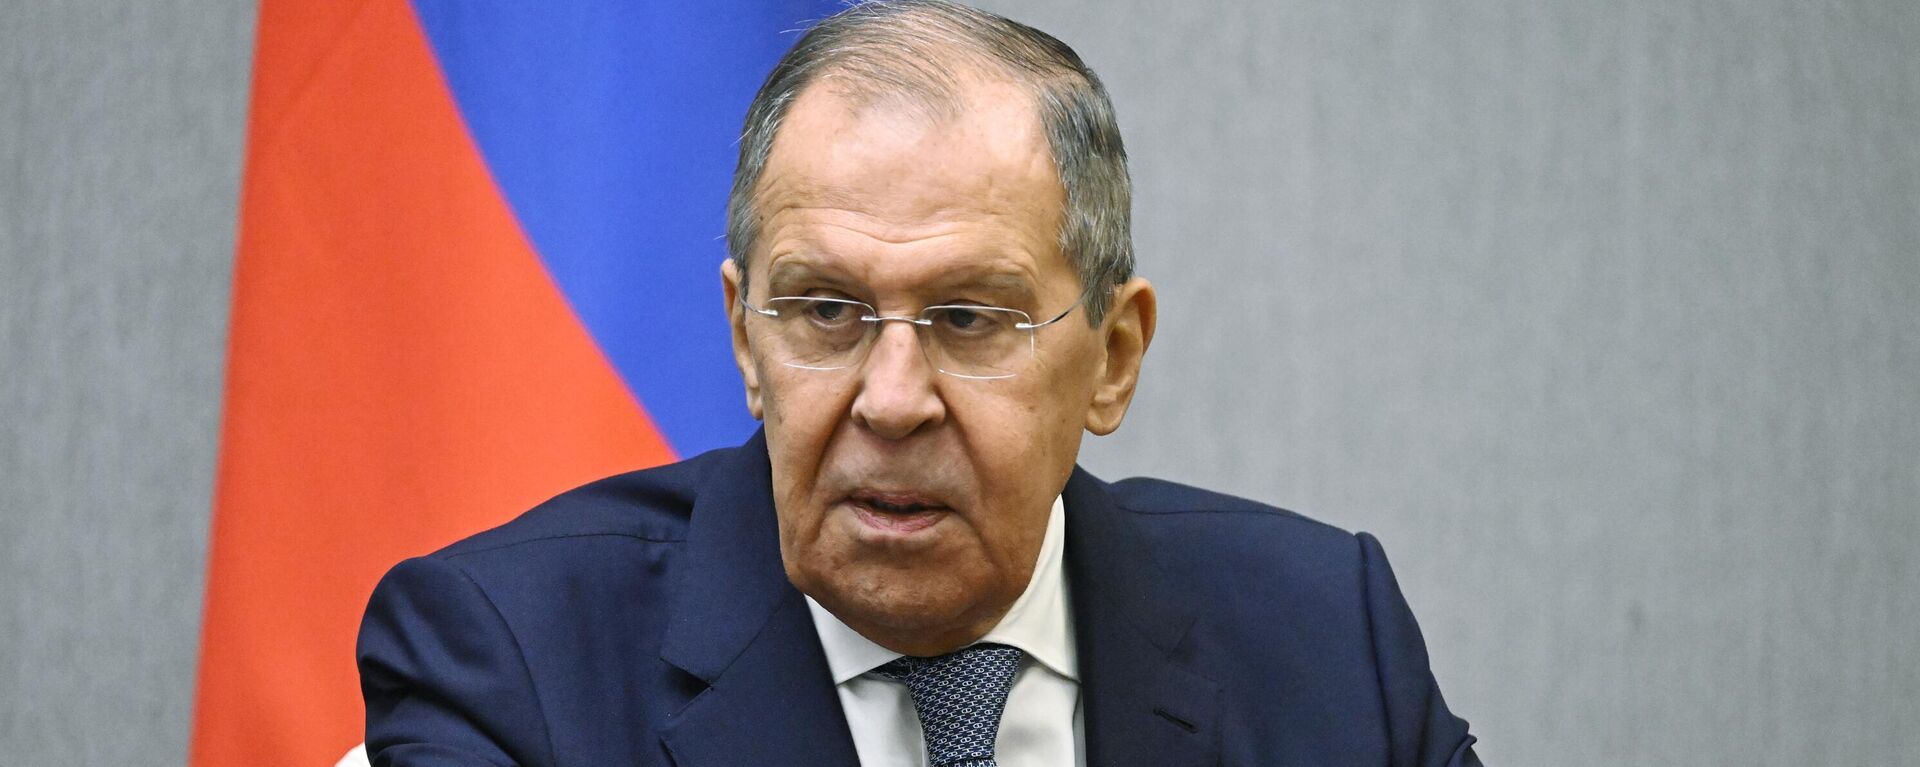 Russian Foreign Minister Sergei Lavrov during the signing of the plan of consultations between the Russian and Abkhaz Foreign Ministries during a meeting with Abkhaz President Aslan Bzhania at the Grand Karat Hotel in Sochi on October 3, 2023. - Sputnik Africa, 1920, 09.10.2023